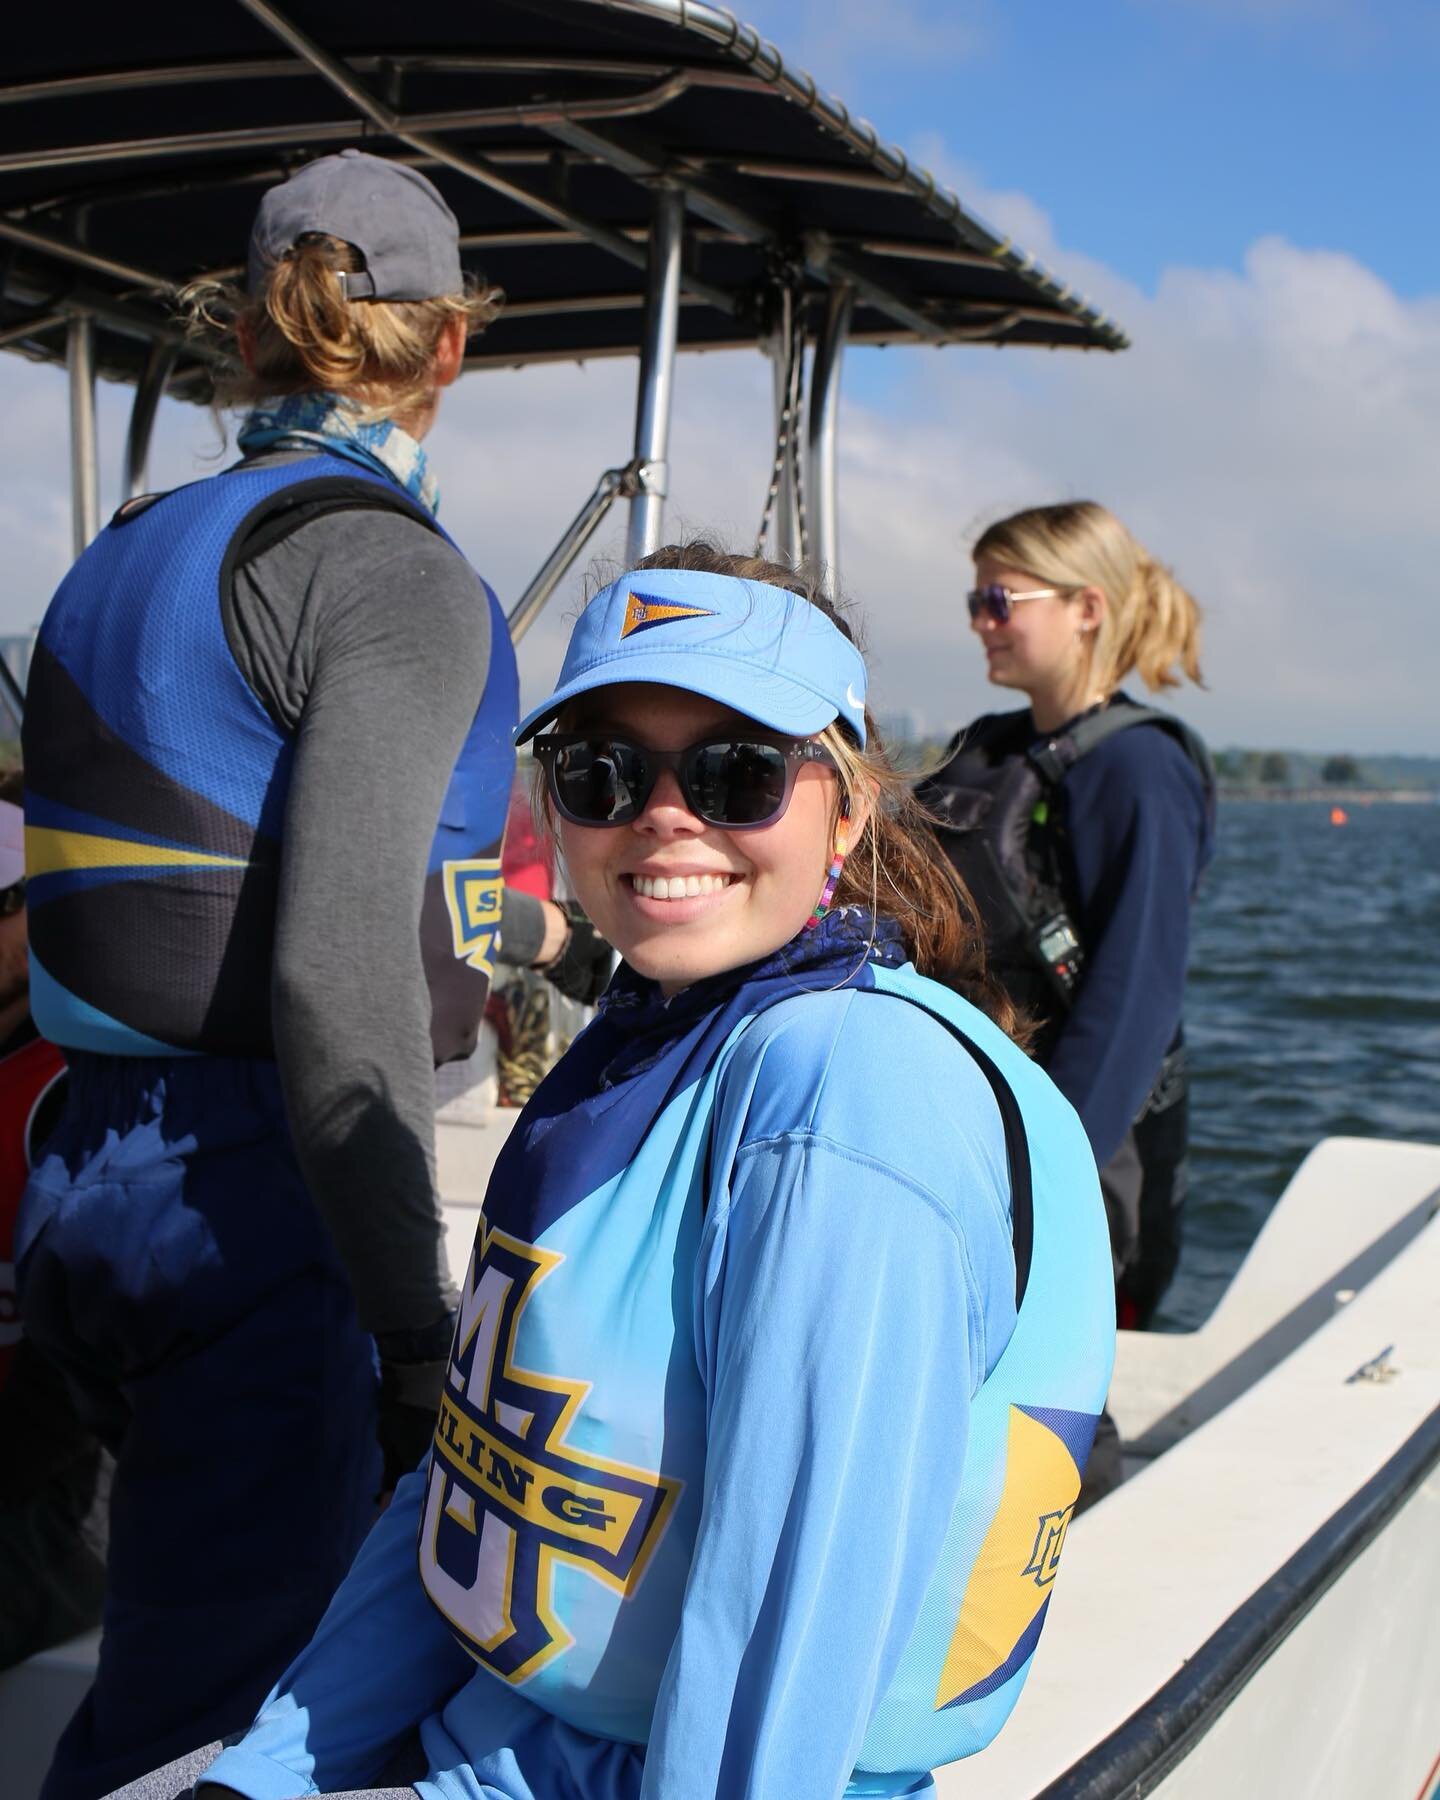 Happy National Girls and Women in Sports Day! 

Marquette Sailing would not be what it is without our female athletes. The day recognizes and celebrates the achievements of female athletes and the positive influence of sports participation on their l